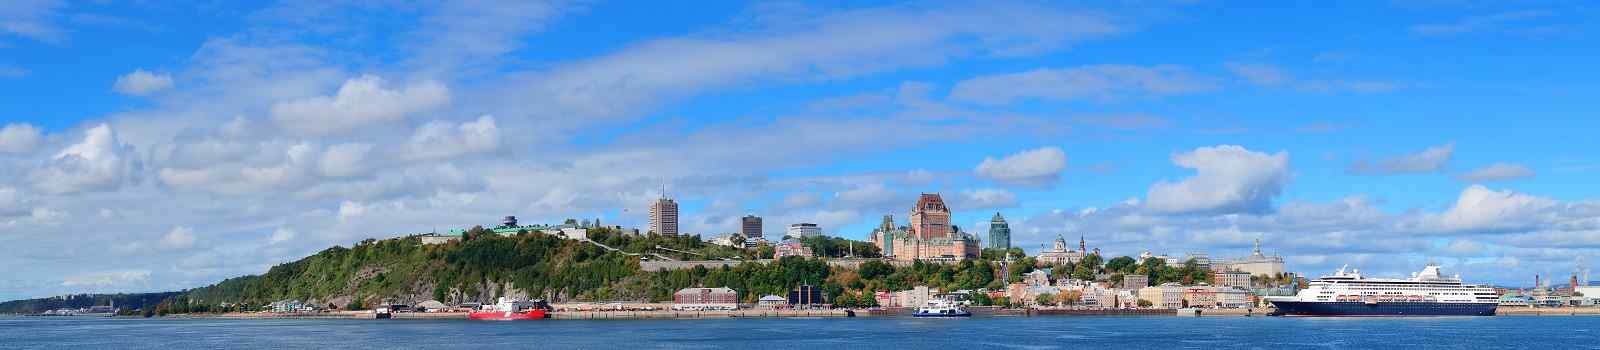 ROUTE-VOYAGEURS Quebec City skyline panorama over river with blue sky and cloud shutterstock 176713067